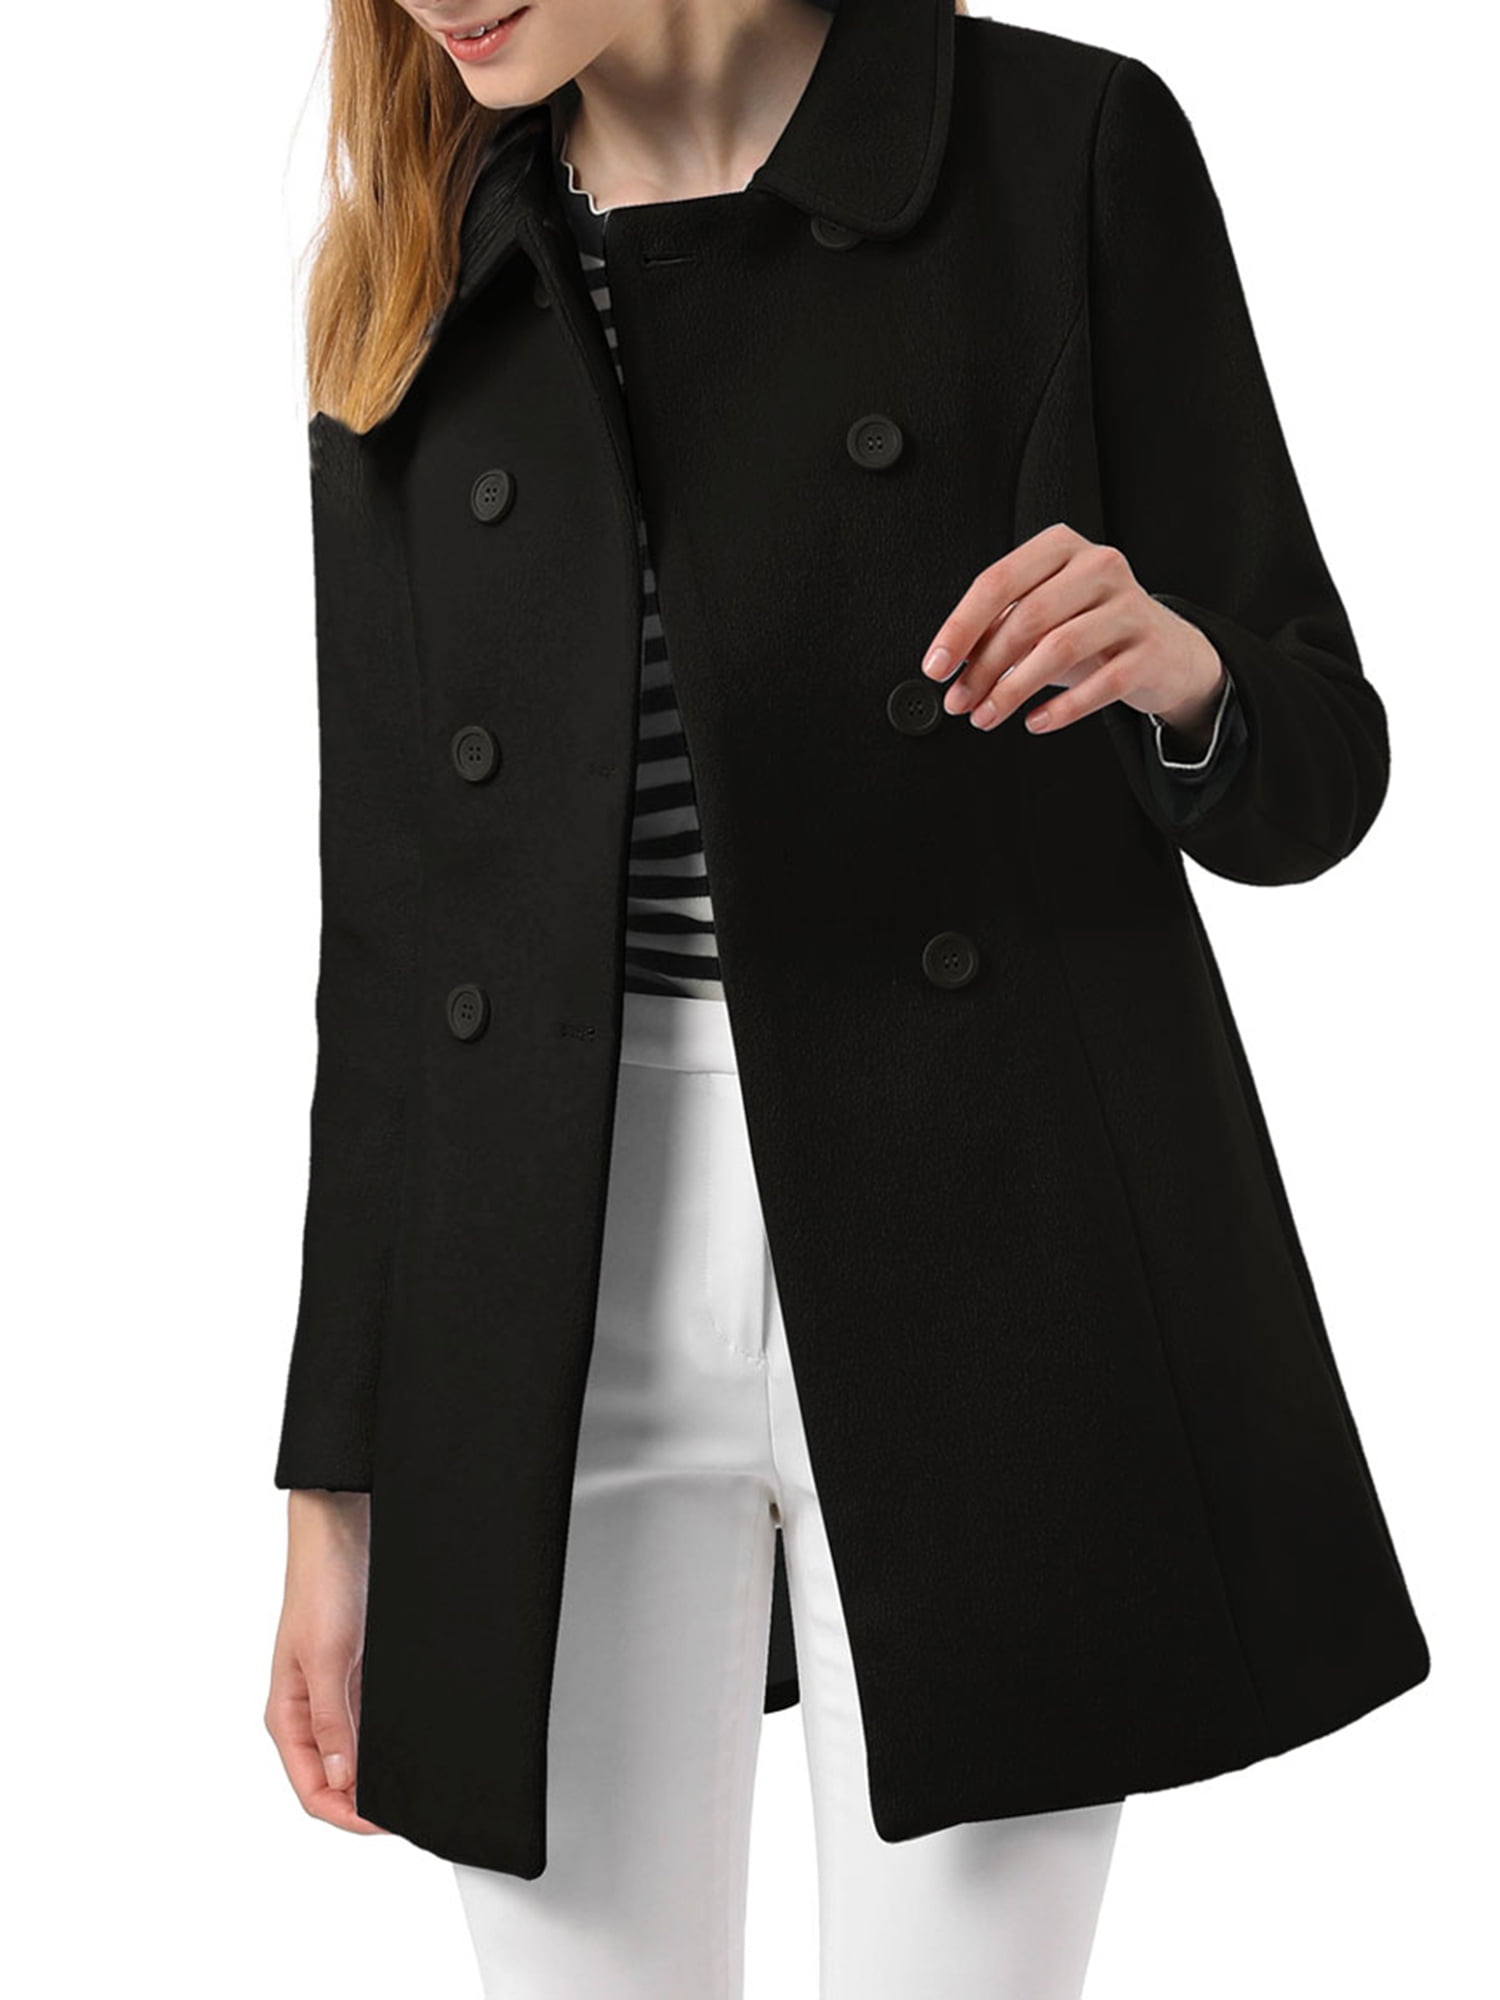 Unique Bargains Women's Peter Pan Collar Double Breasted Winter Trench ...